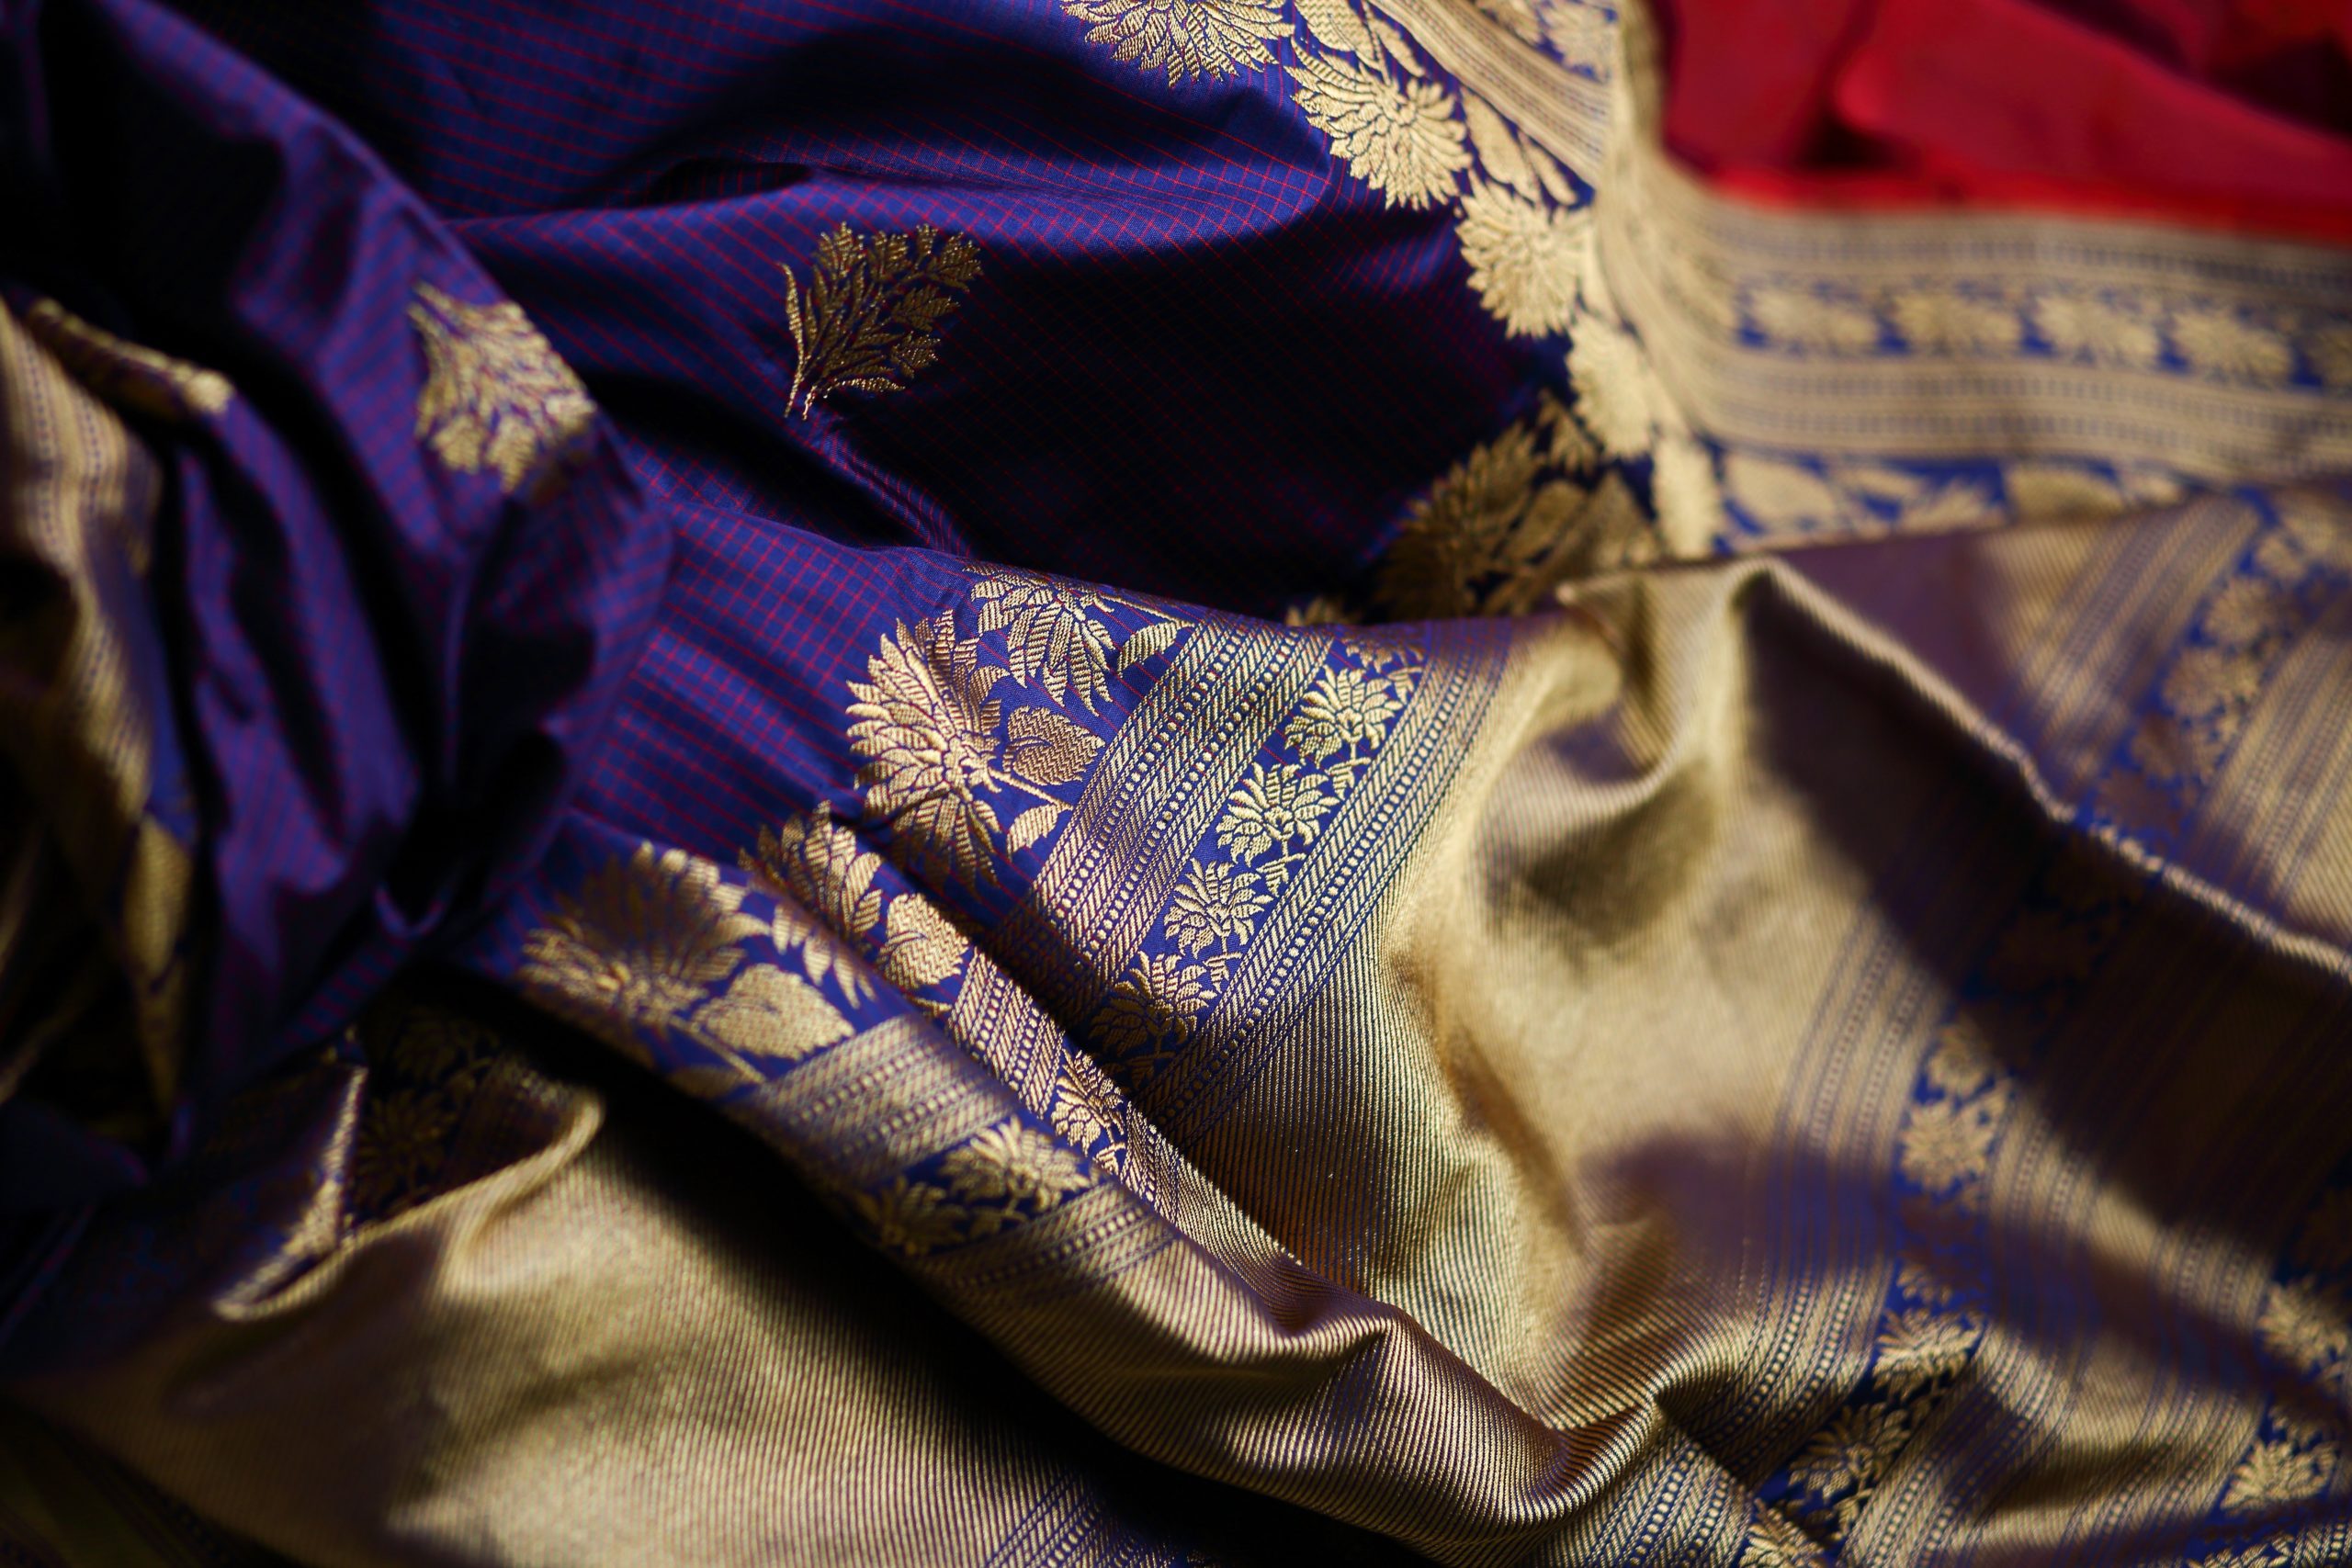 violet and gold threaded sari